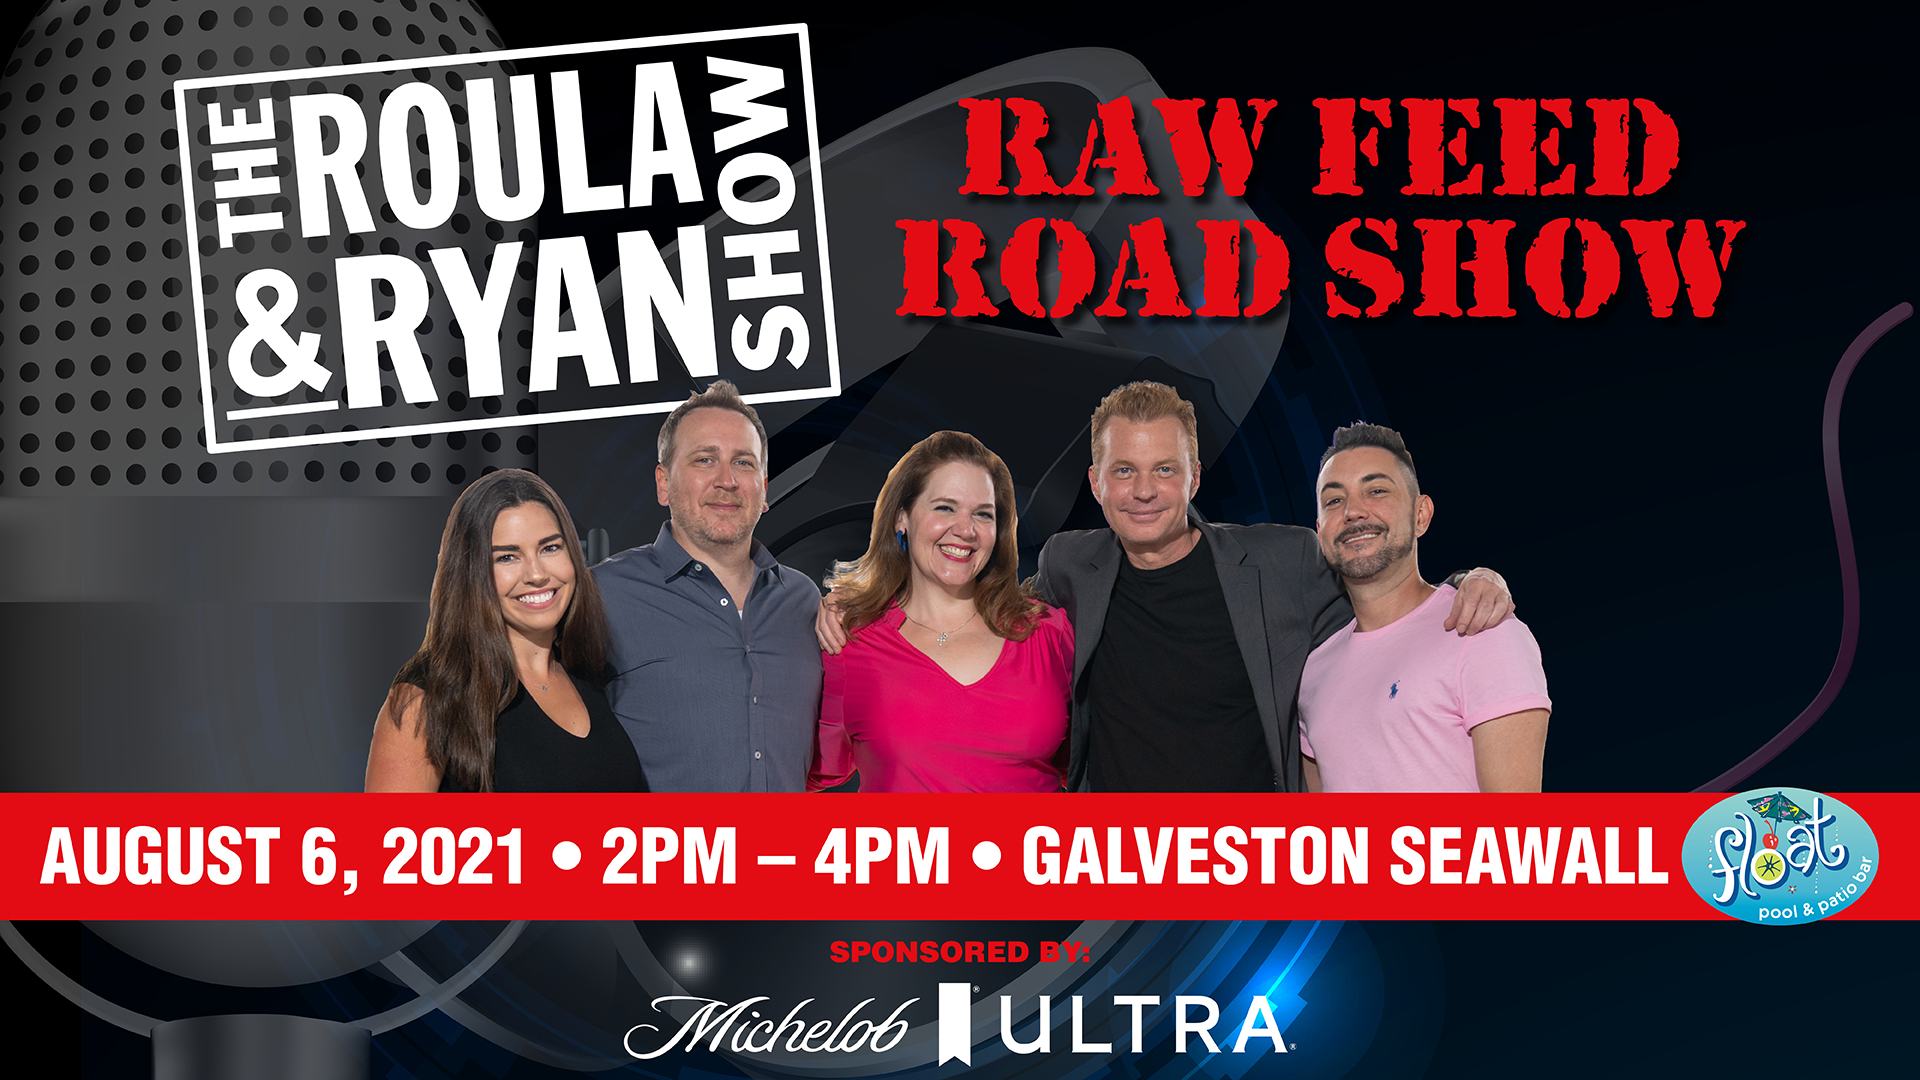 The Raw Feed Road Show